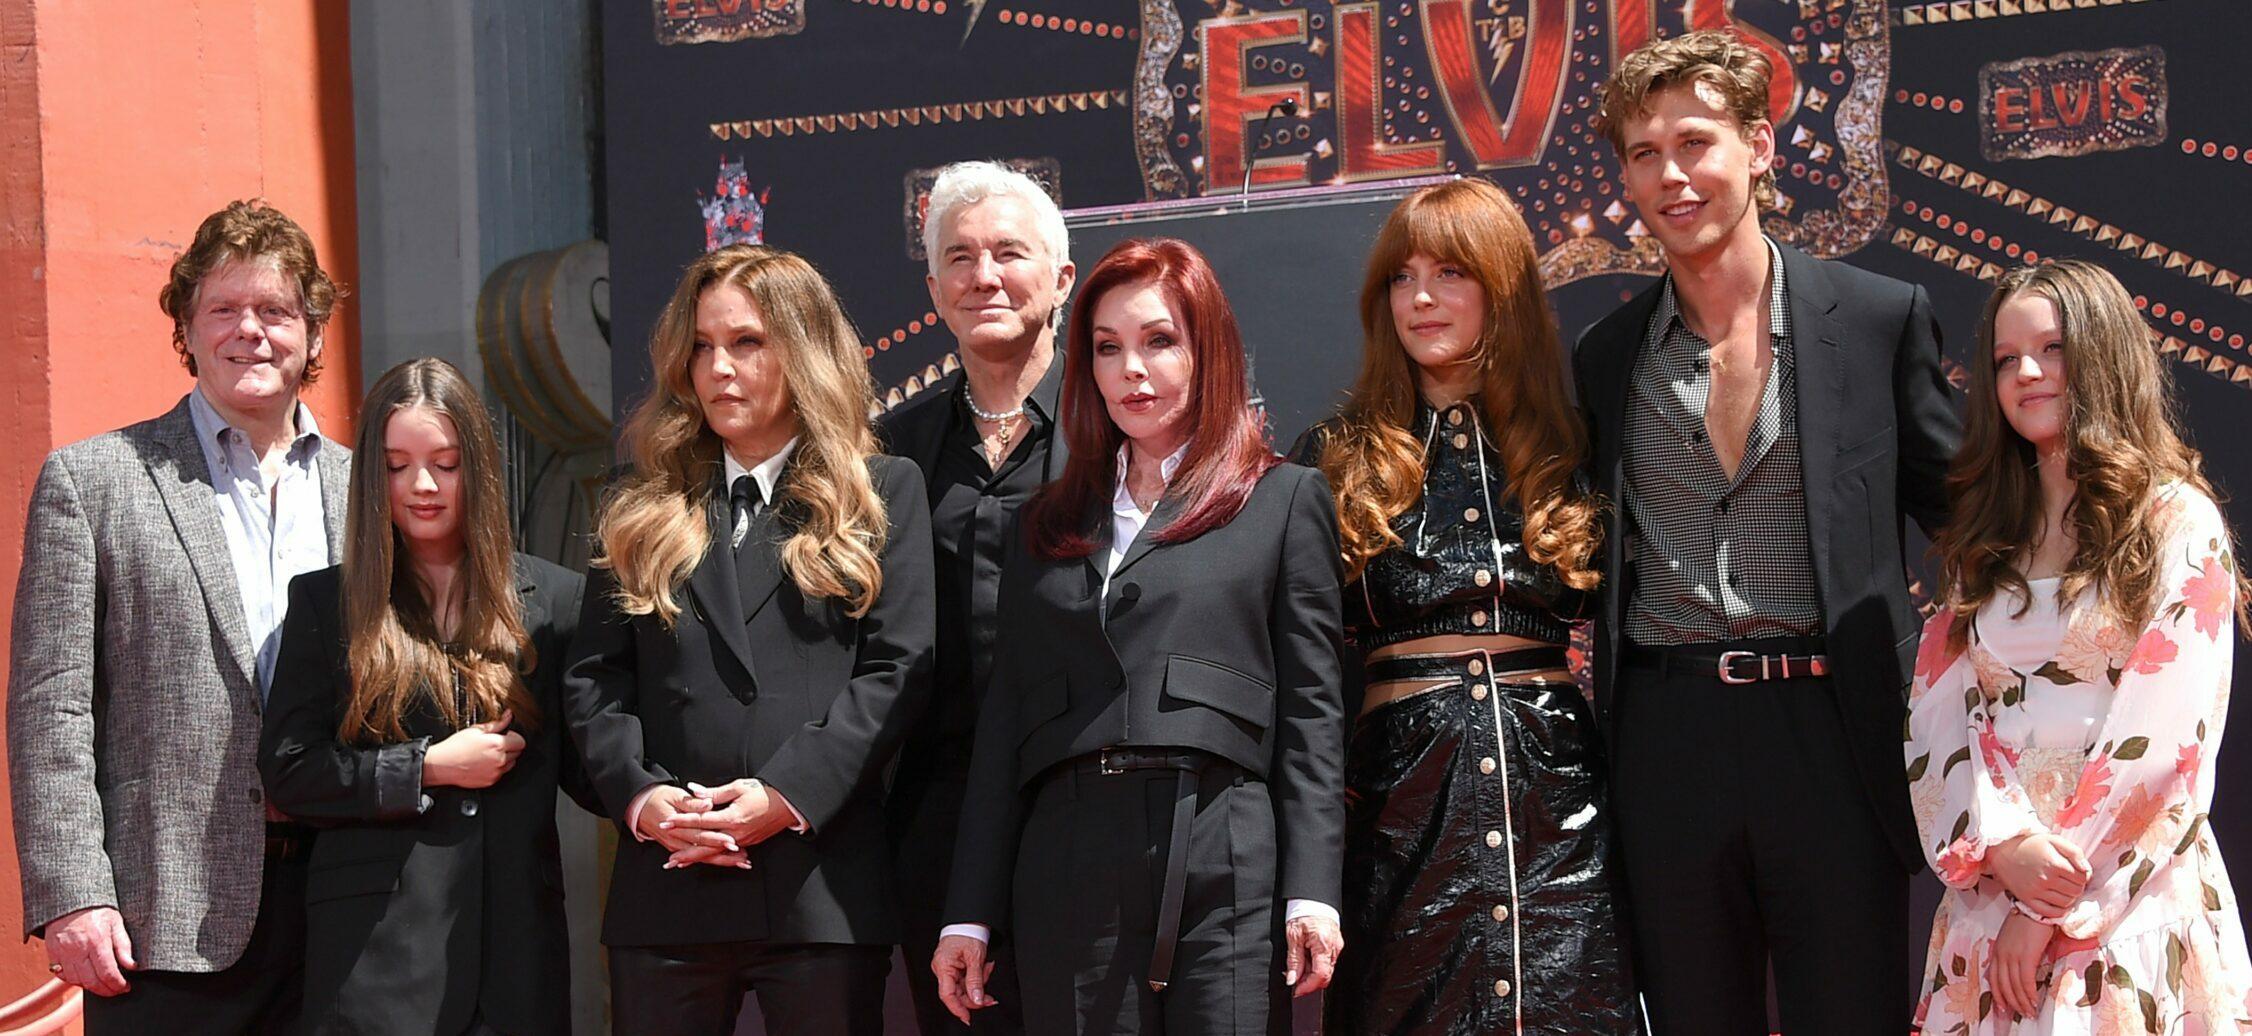 Late Lisa Marie Presley with cast of "Elvis"